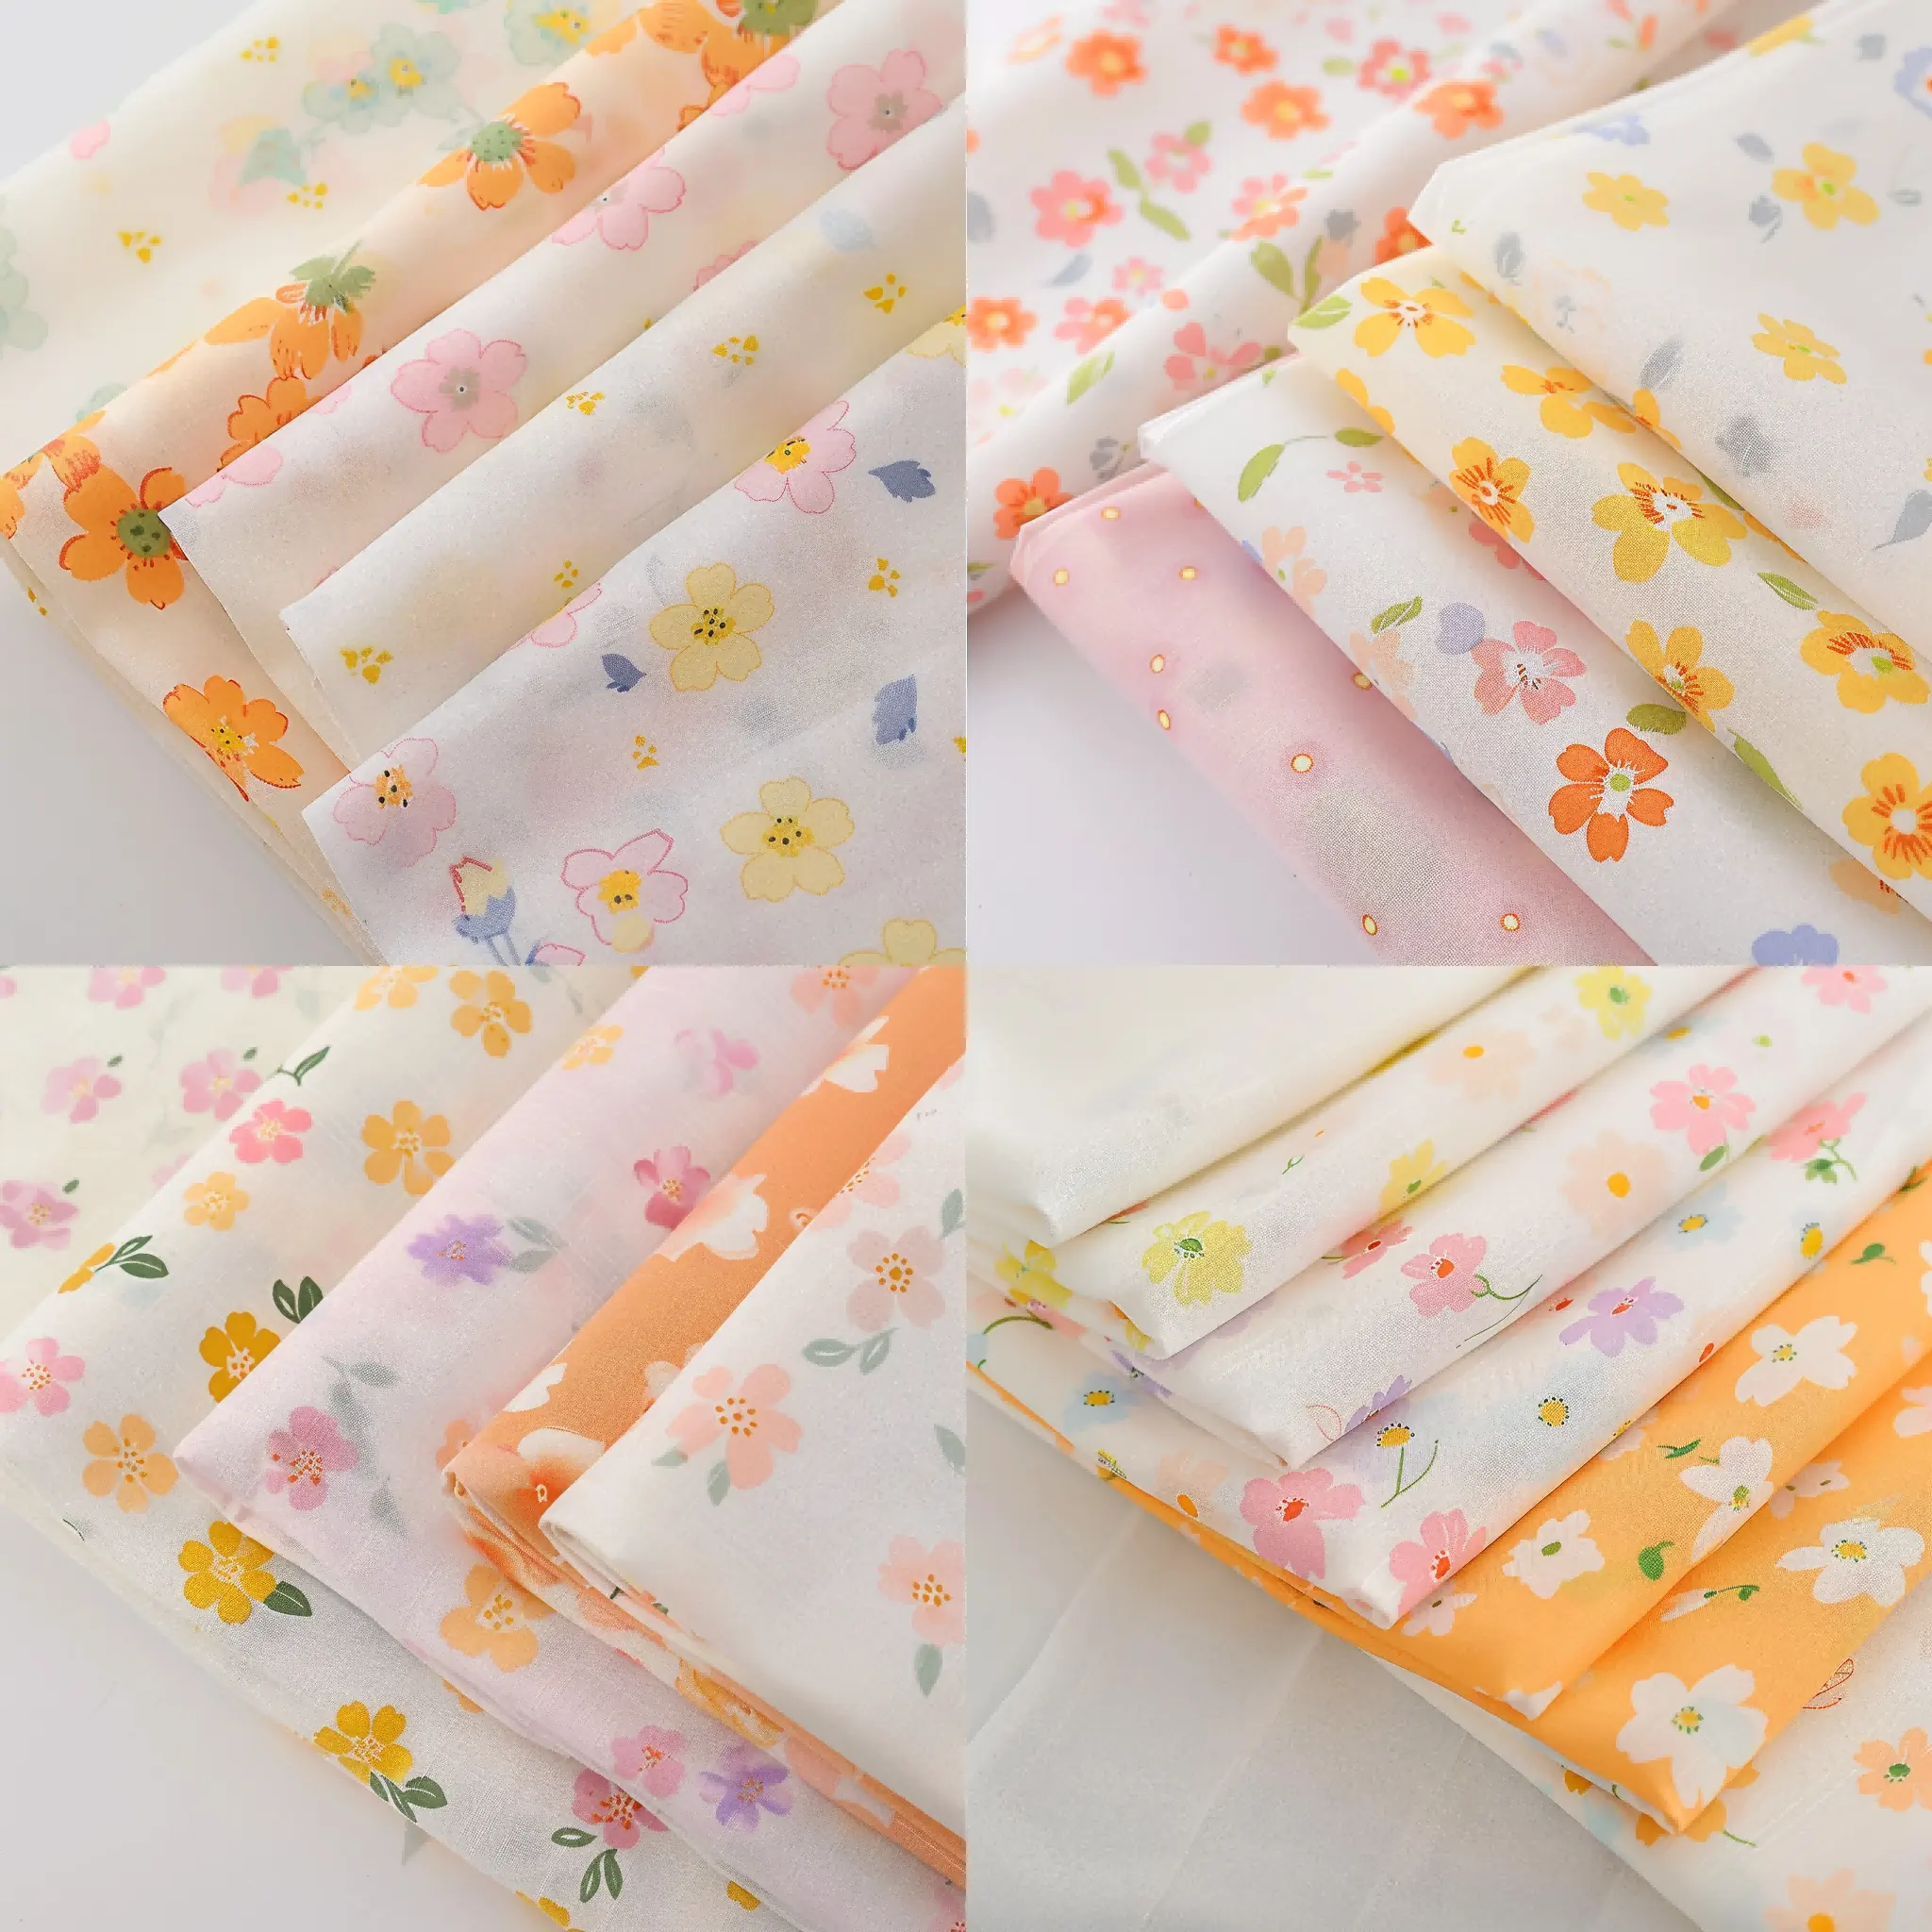 Kids Double-sided twill Print Cotton fabric Double Face Cotton Woven Twill Fabric Multi Color Floral Printing for Children